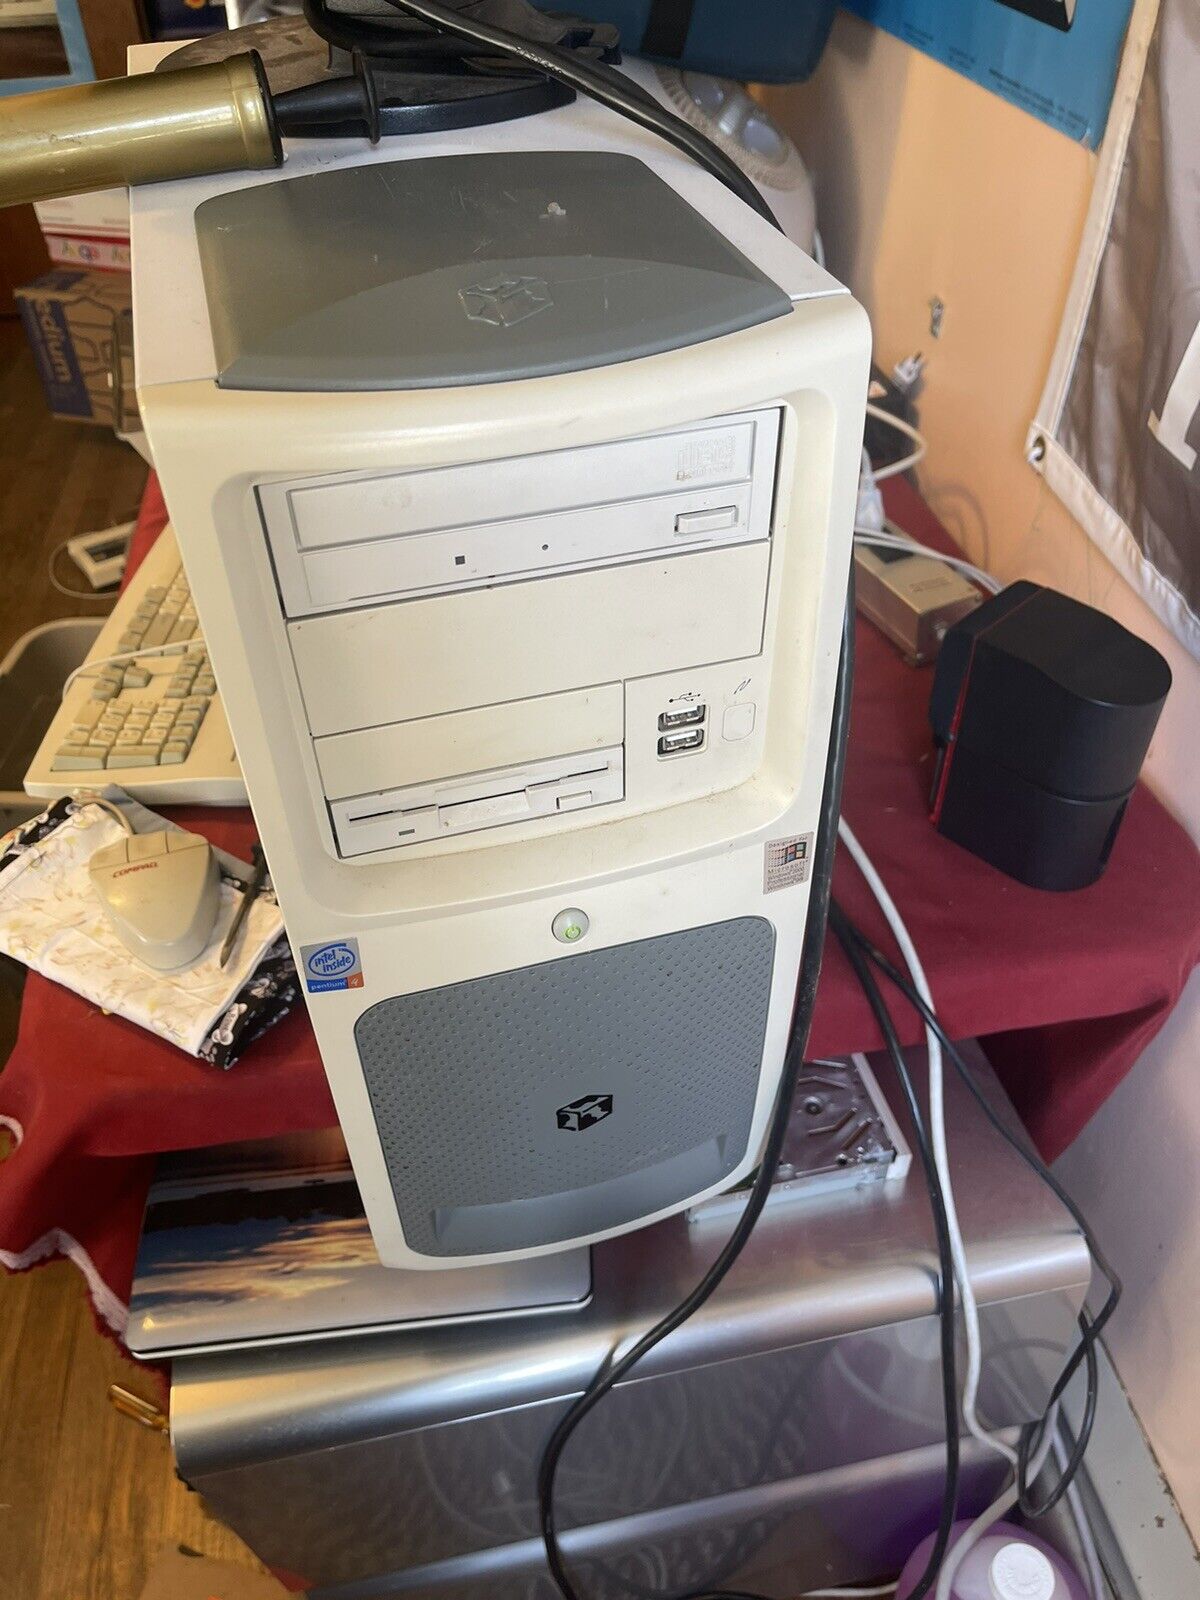 Gateway ATXSTF FED Pro Retro PC Pentium 4 1.40 ghz 256MB RAM No HDD No OS as is